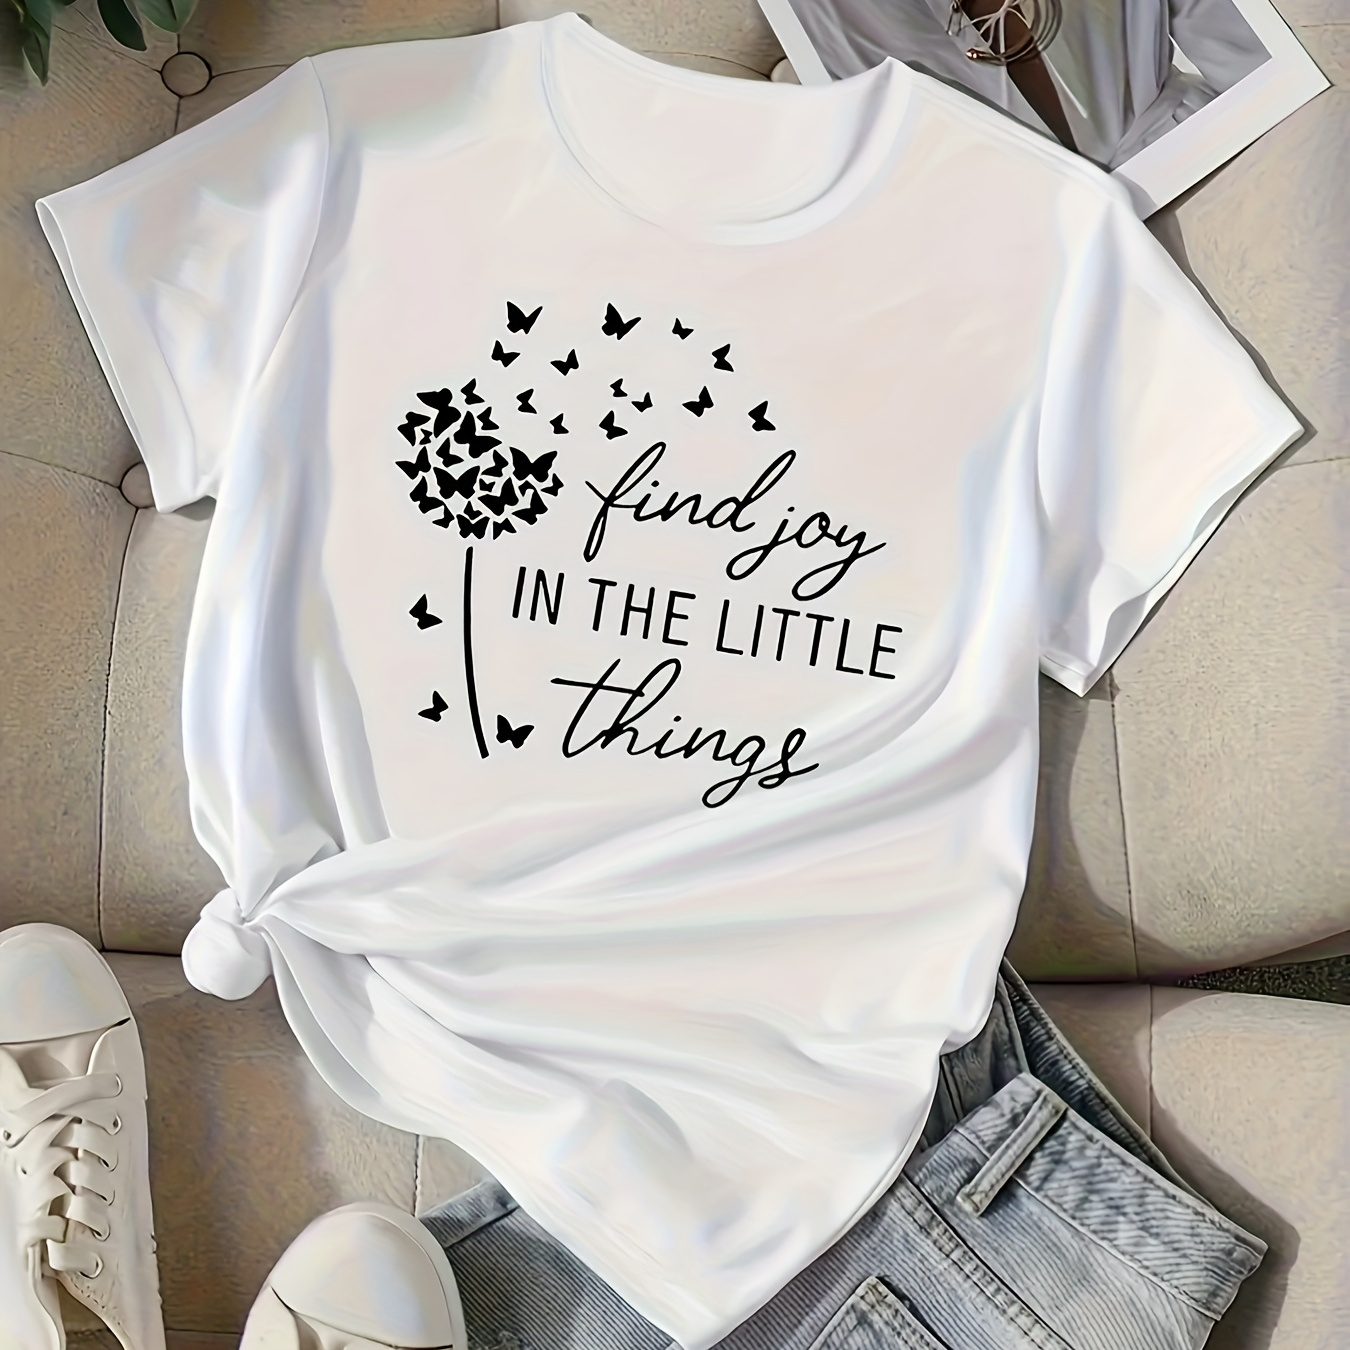 

Find Joy In The Little Things Print T-shirt, Casual Crew Neck Short Sleeve T-shirt For Spring & Summer, Women's Clothing